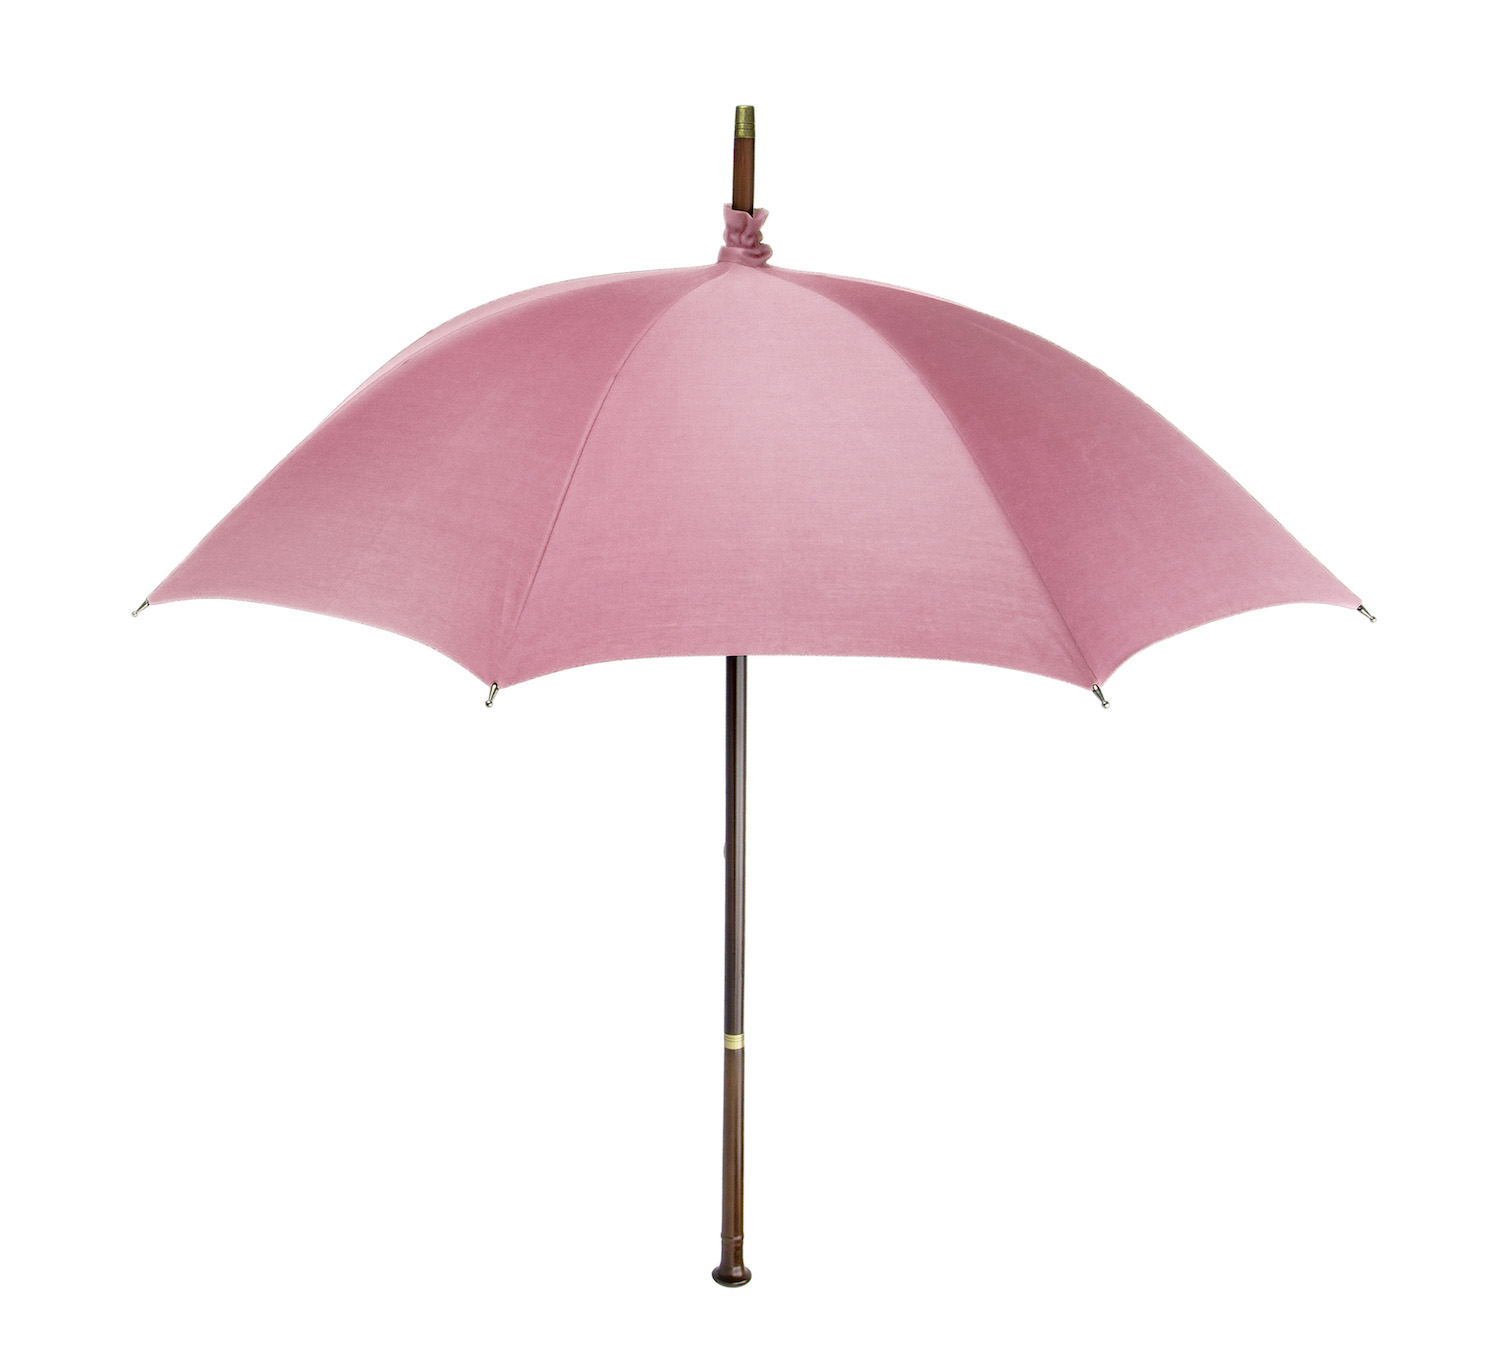 Don’t let its stylish design fool you! The umbrella is fully functional.